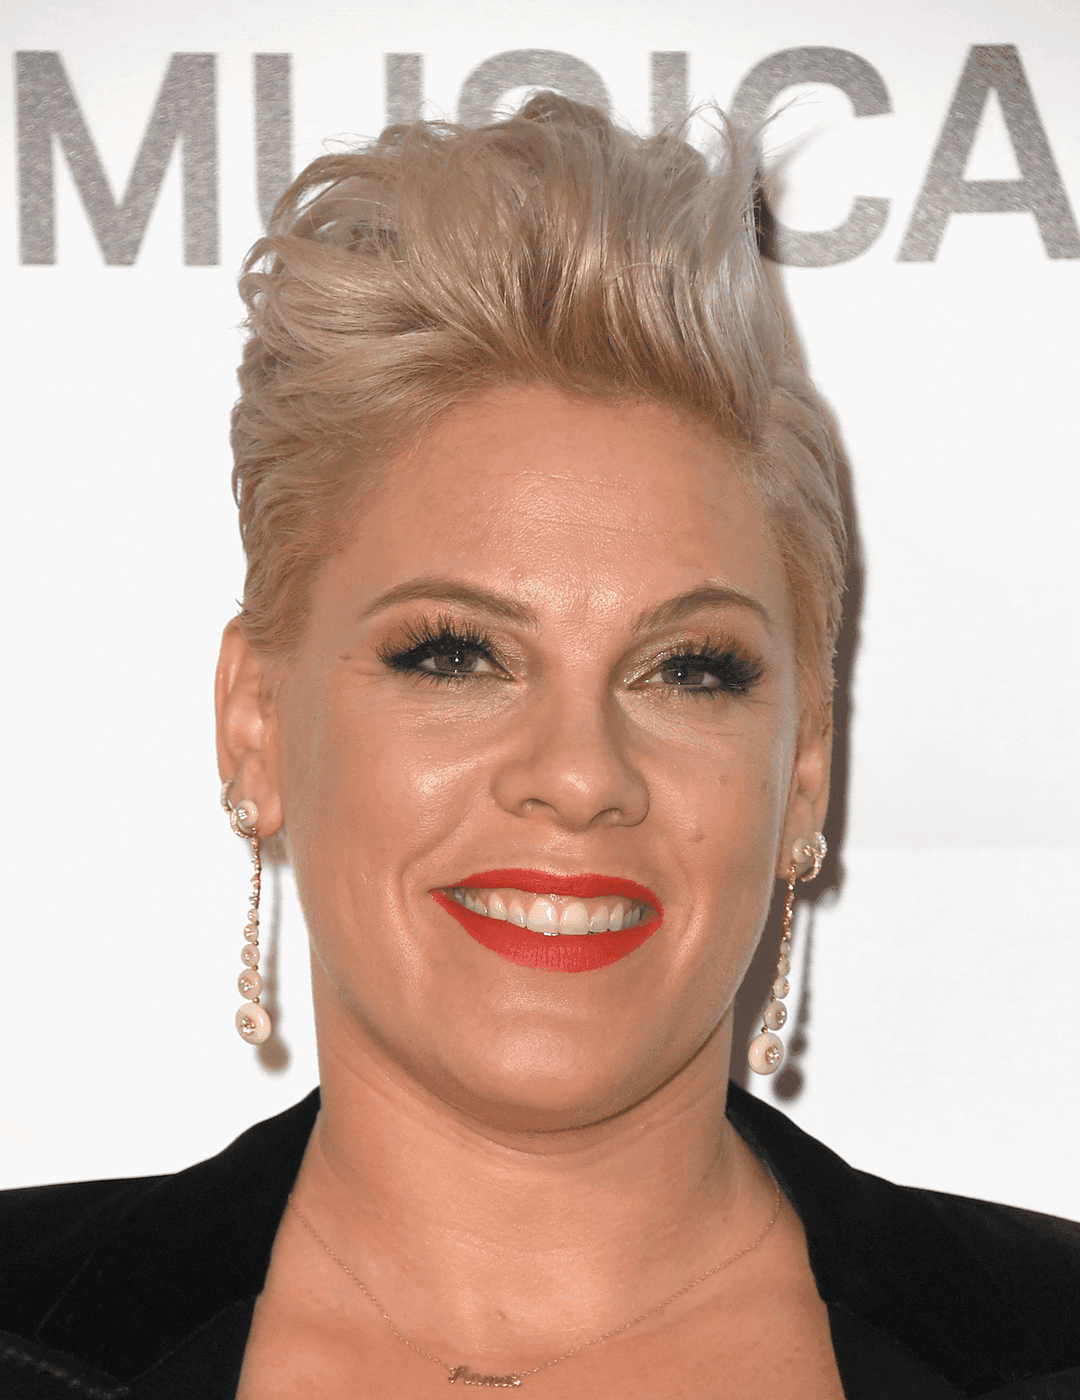 Pink rocking a black suit, gold dangling earrings, bold lip makeup look and faux hawk hairstyle